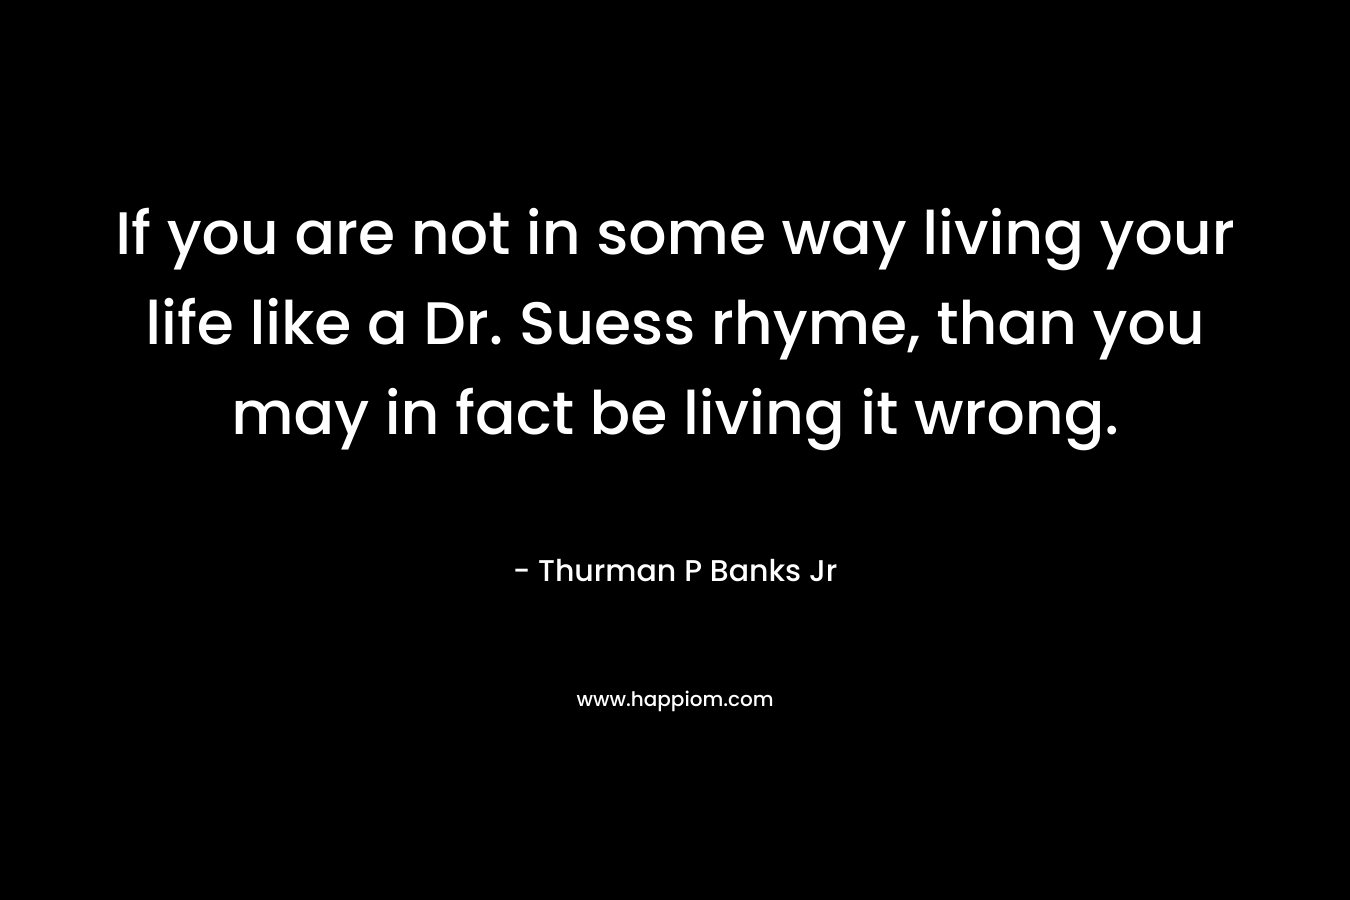 If you are not in some way living your life like a Dr. Suess rhyme, than you may in fact be living it wrong. – Thurman P Banks Jr